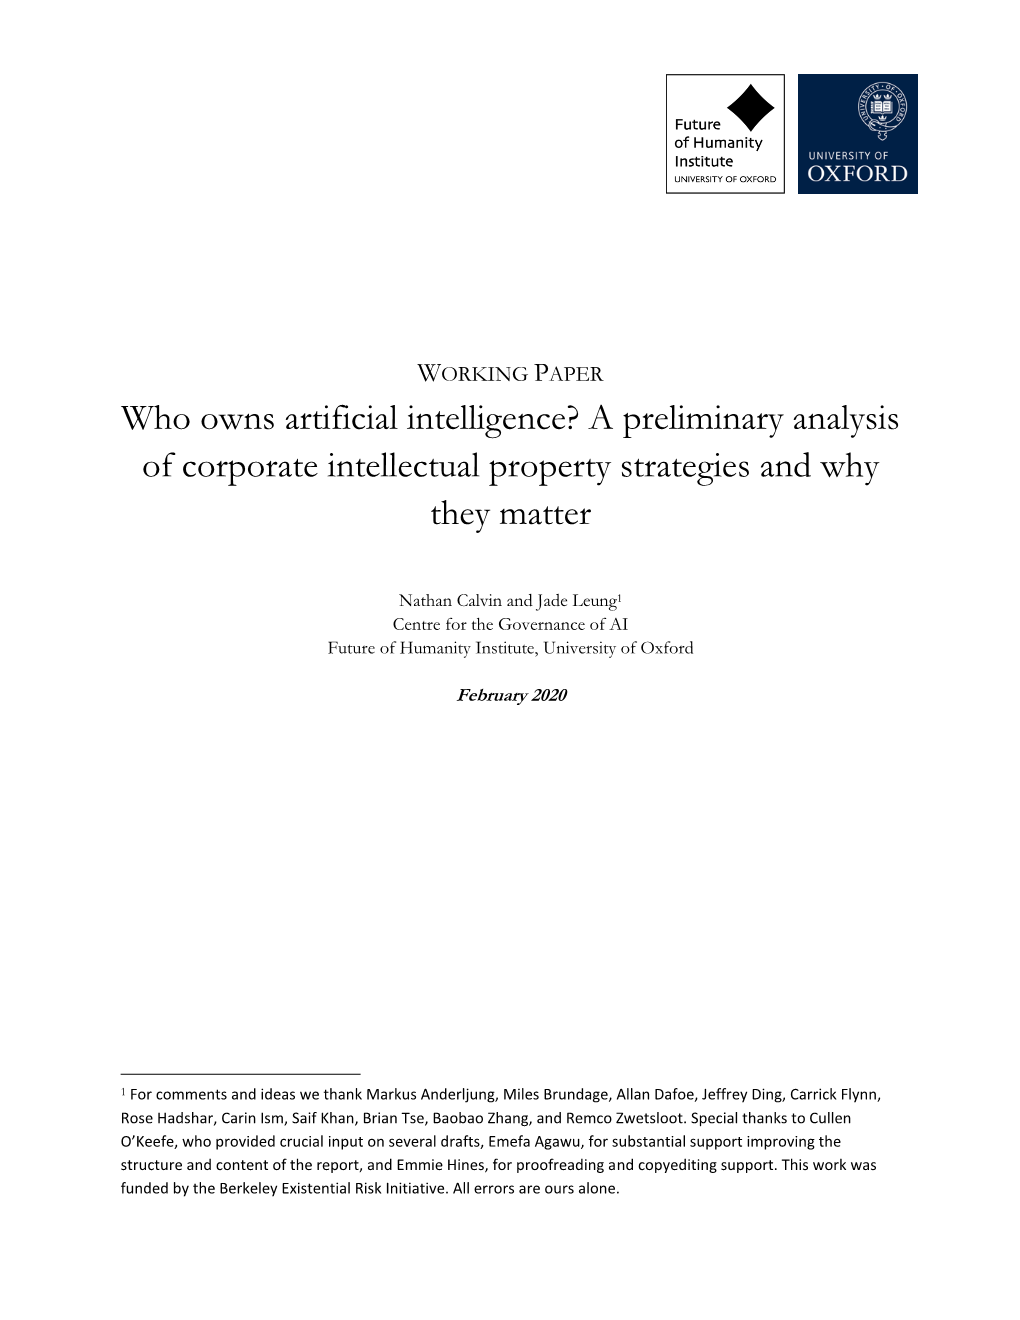 Who Owns Artificial Intelligence? a Preliminary Analysis of Corporate Intellectual Property Strategies and Why They Matter